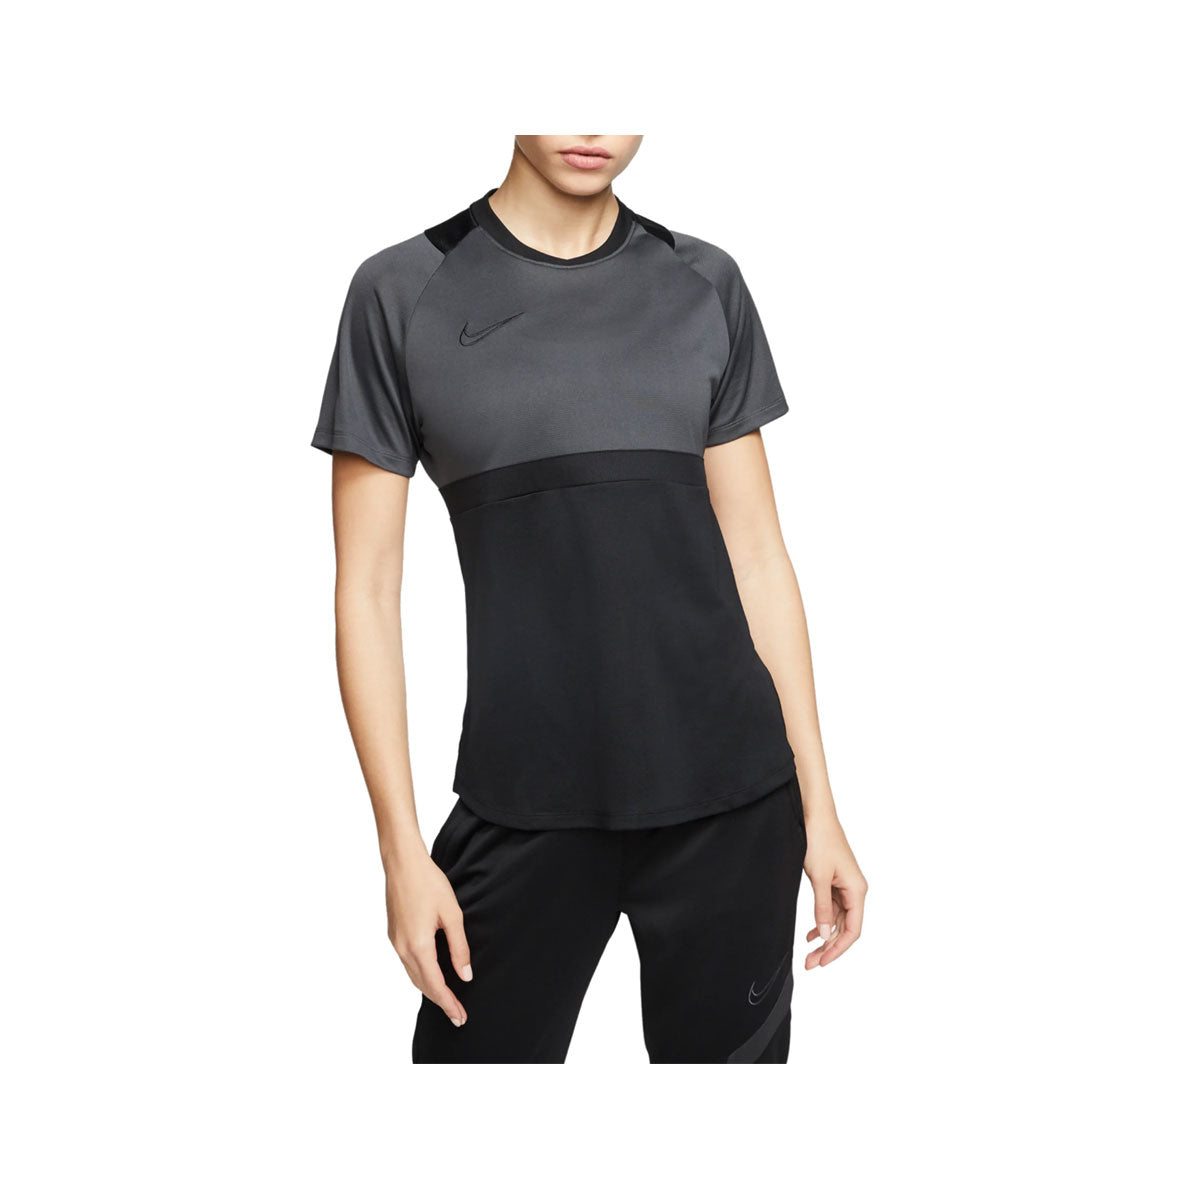 Nike Men's Dry-Fit Academy Pro Soccer Top - KickzStore